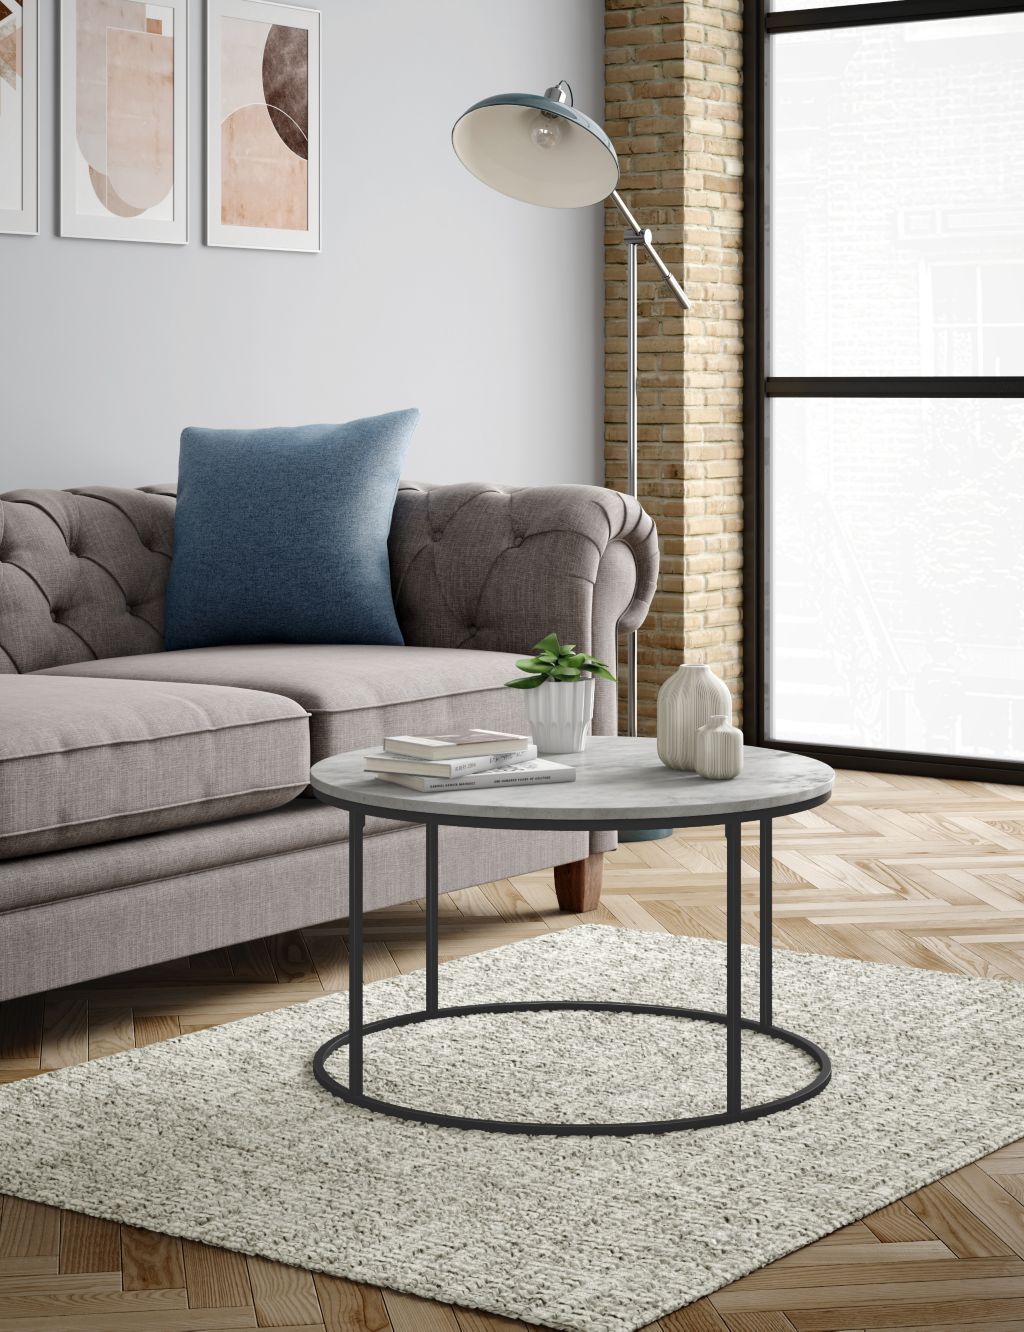 Farley Round Coffee Table